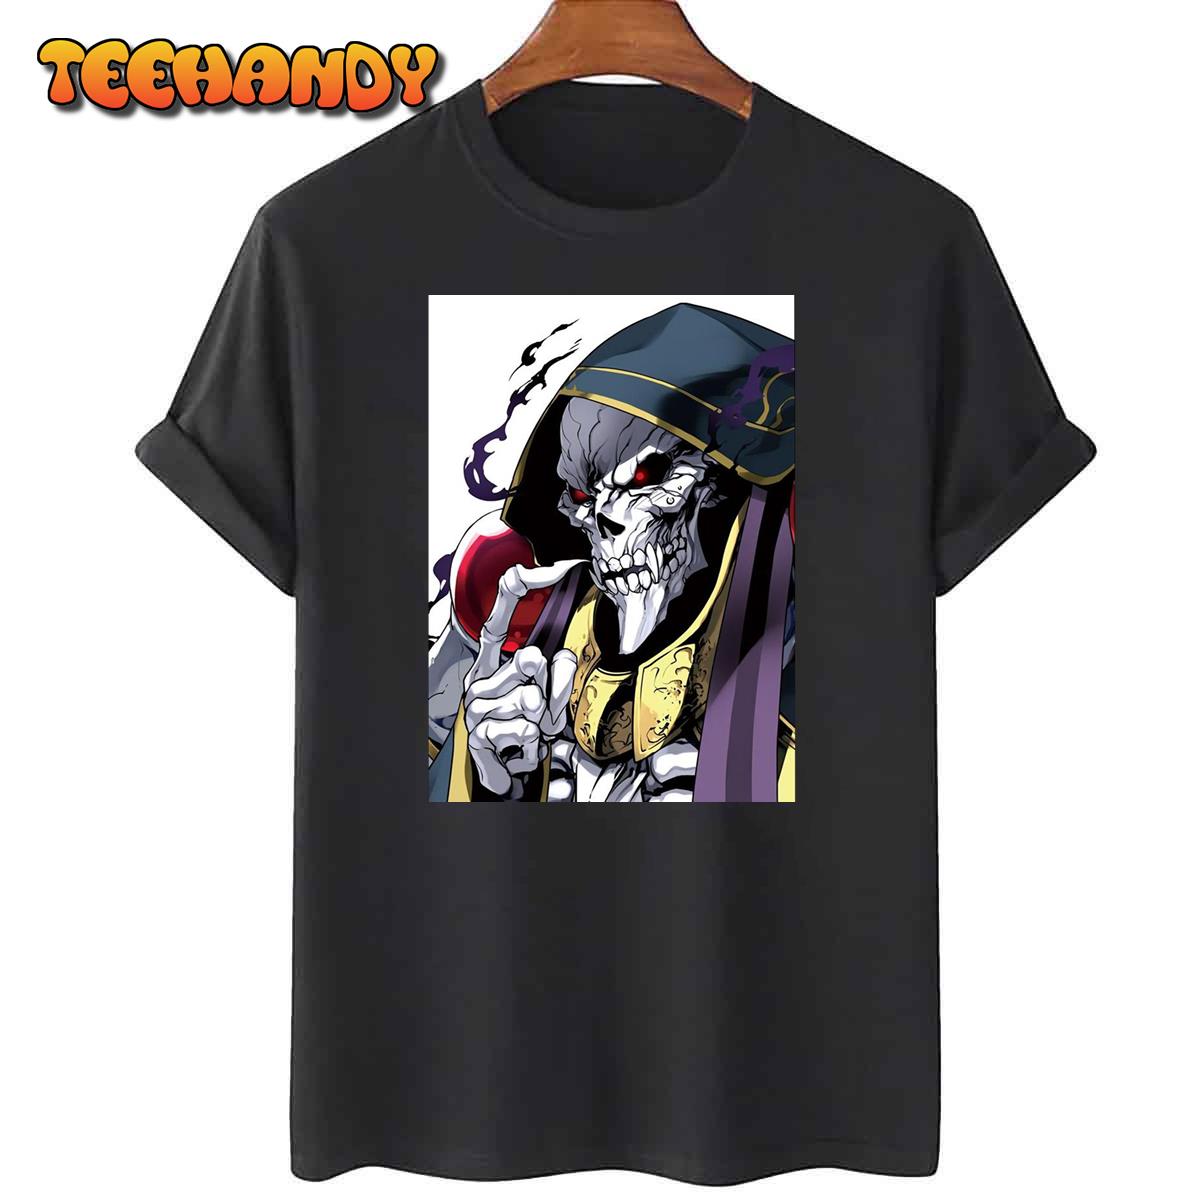 Anime Overlord Ainz Ooal Gown Mens Cotton T Shirt img1 C11